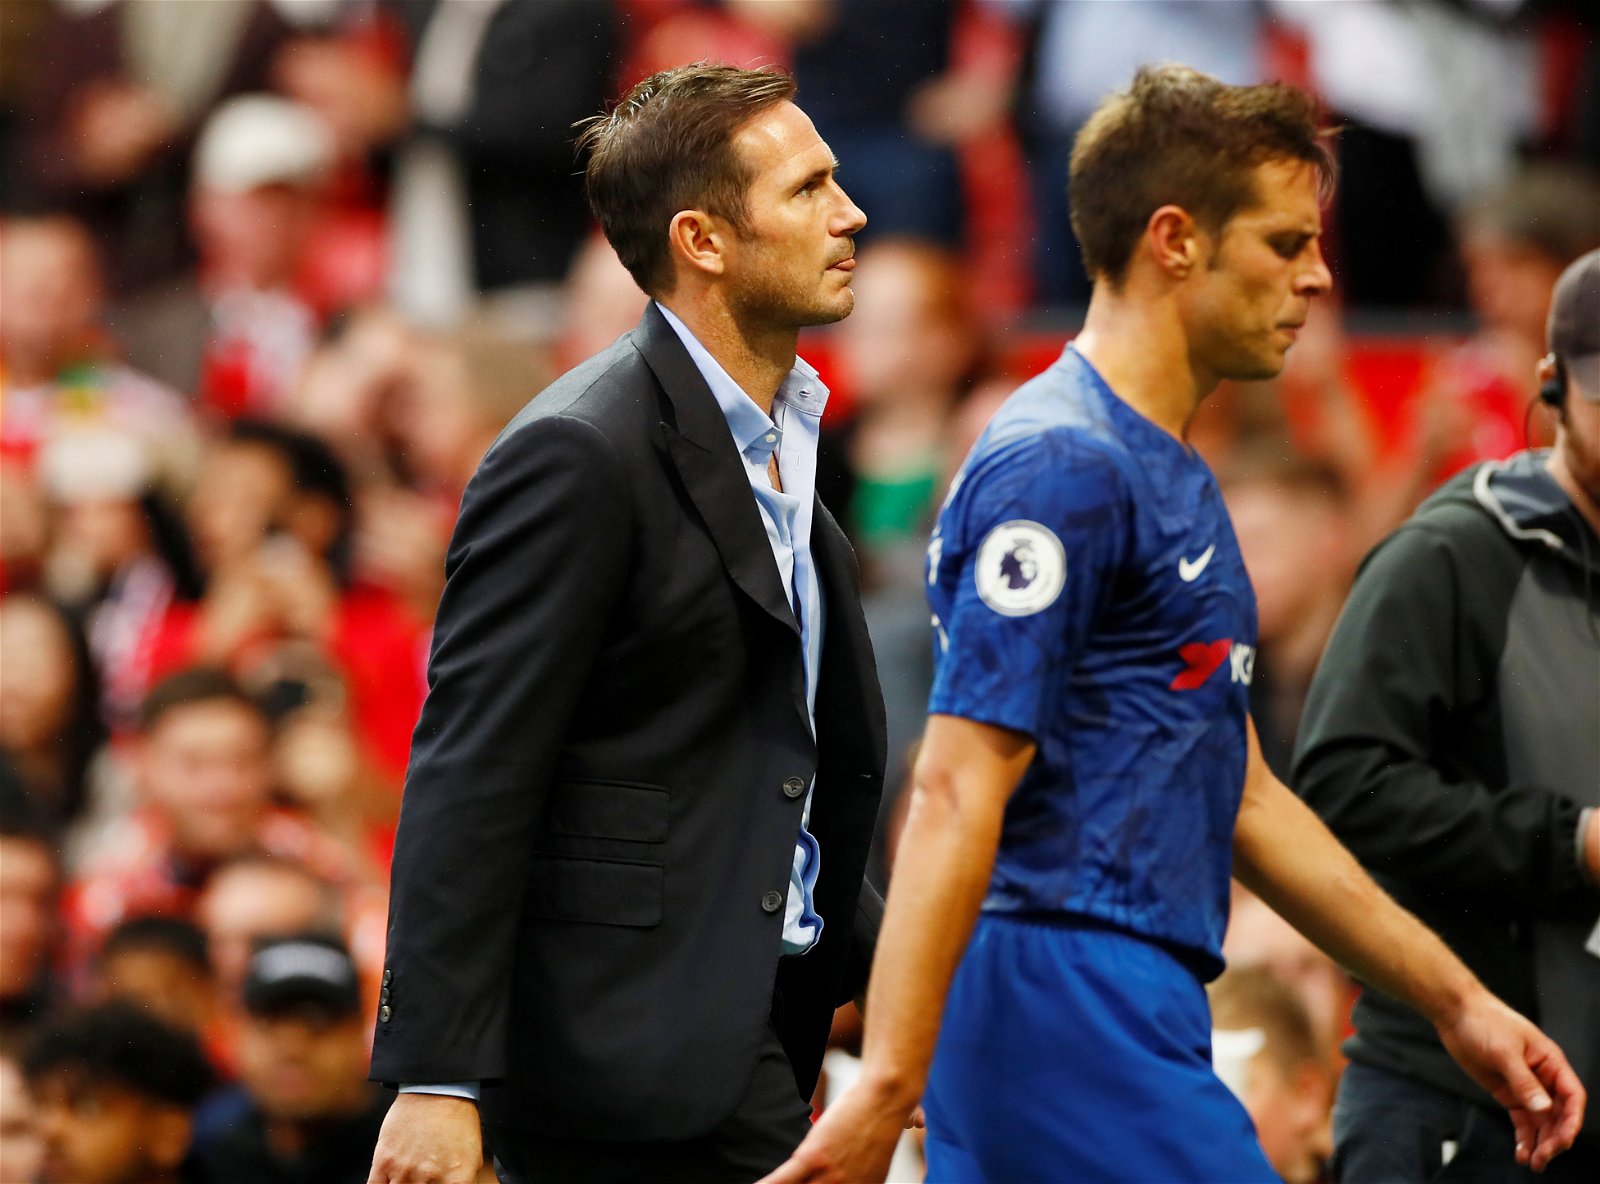 Dave warns Chelsea to be ready for Liverpool